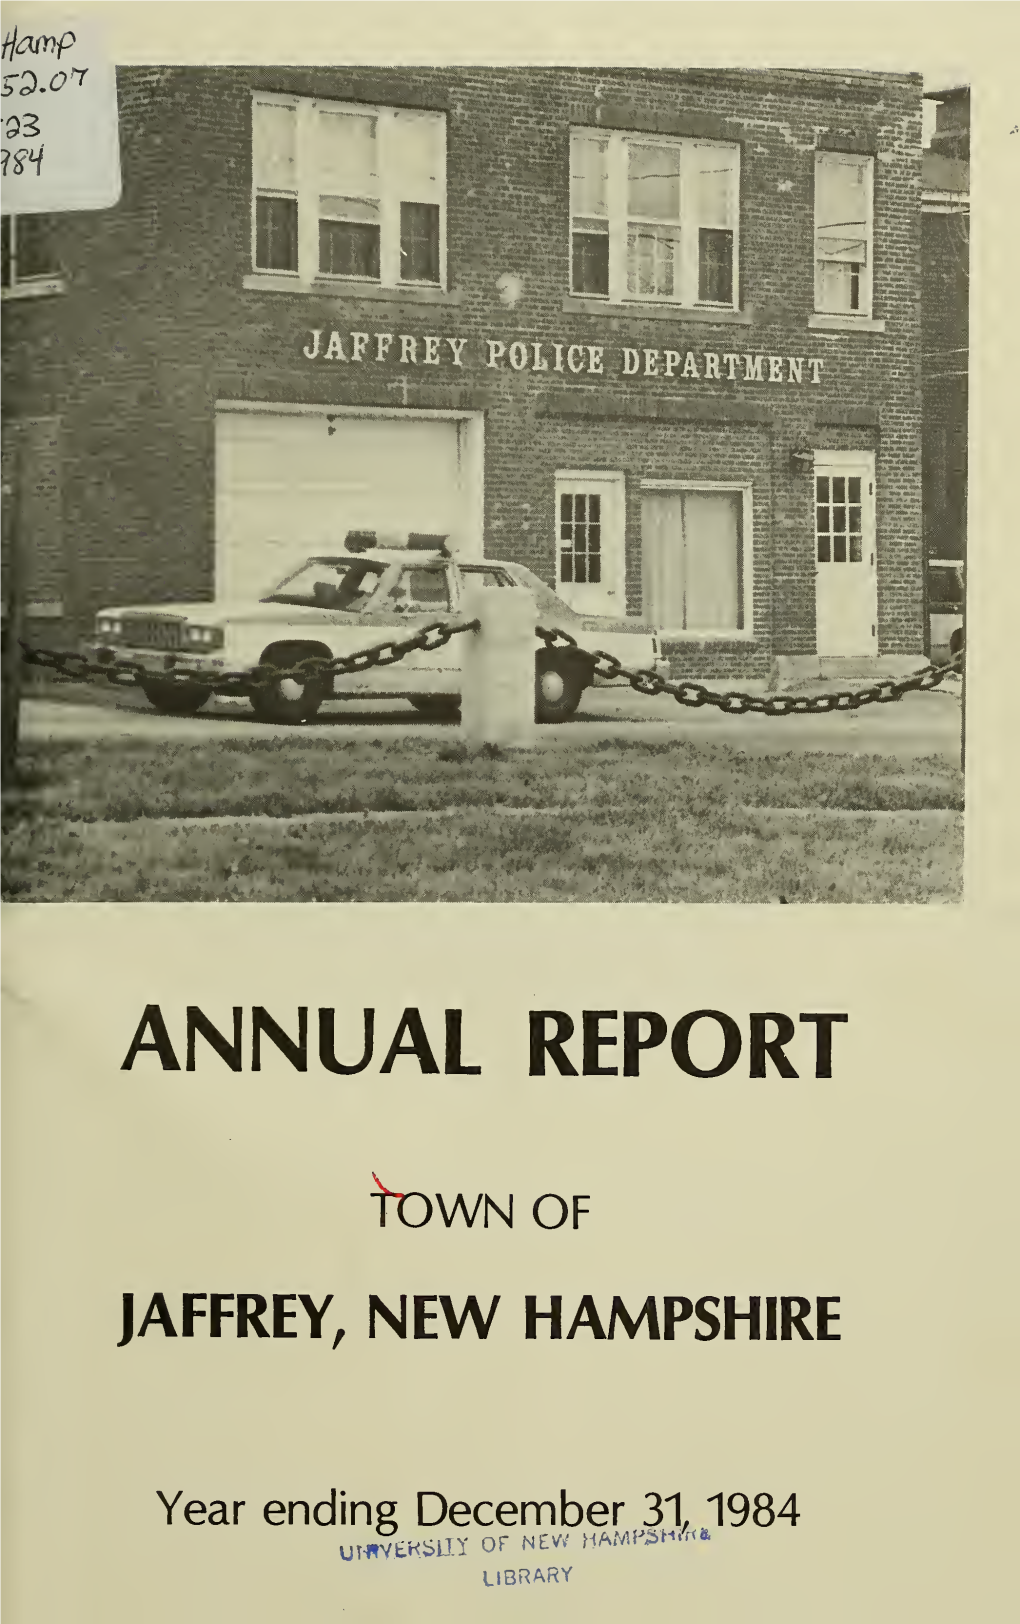 Annual Report Town of Jaffrey, New Hampshire